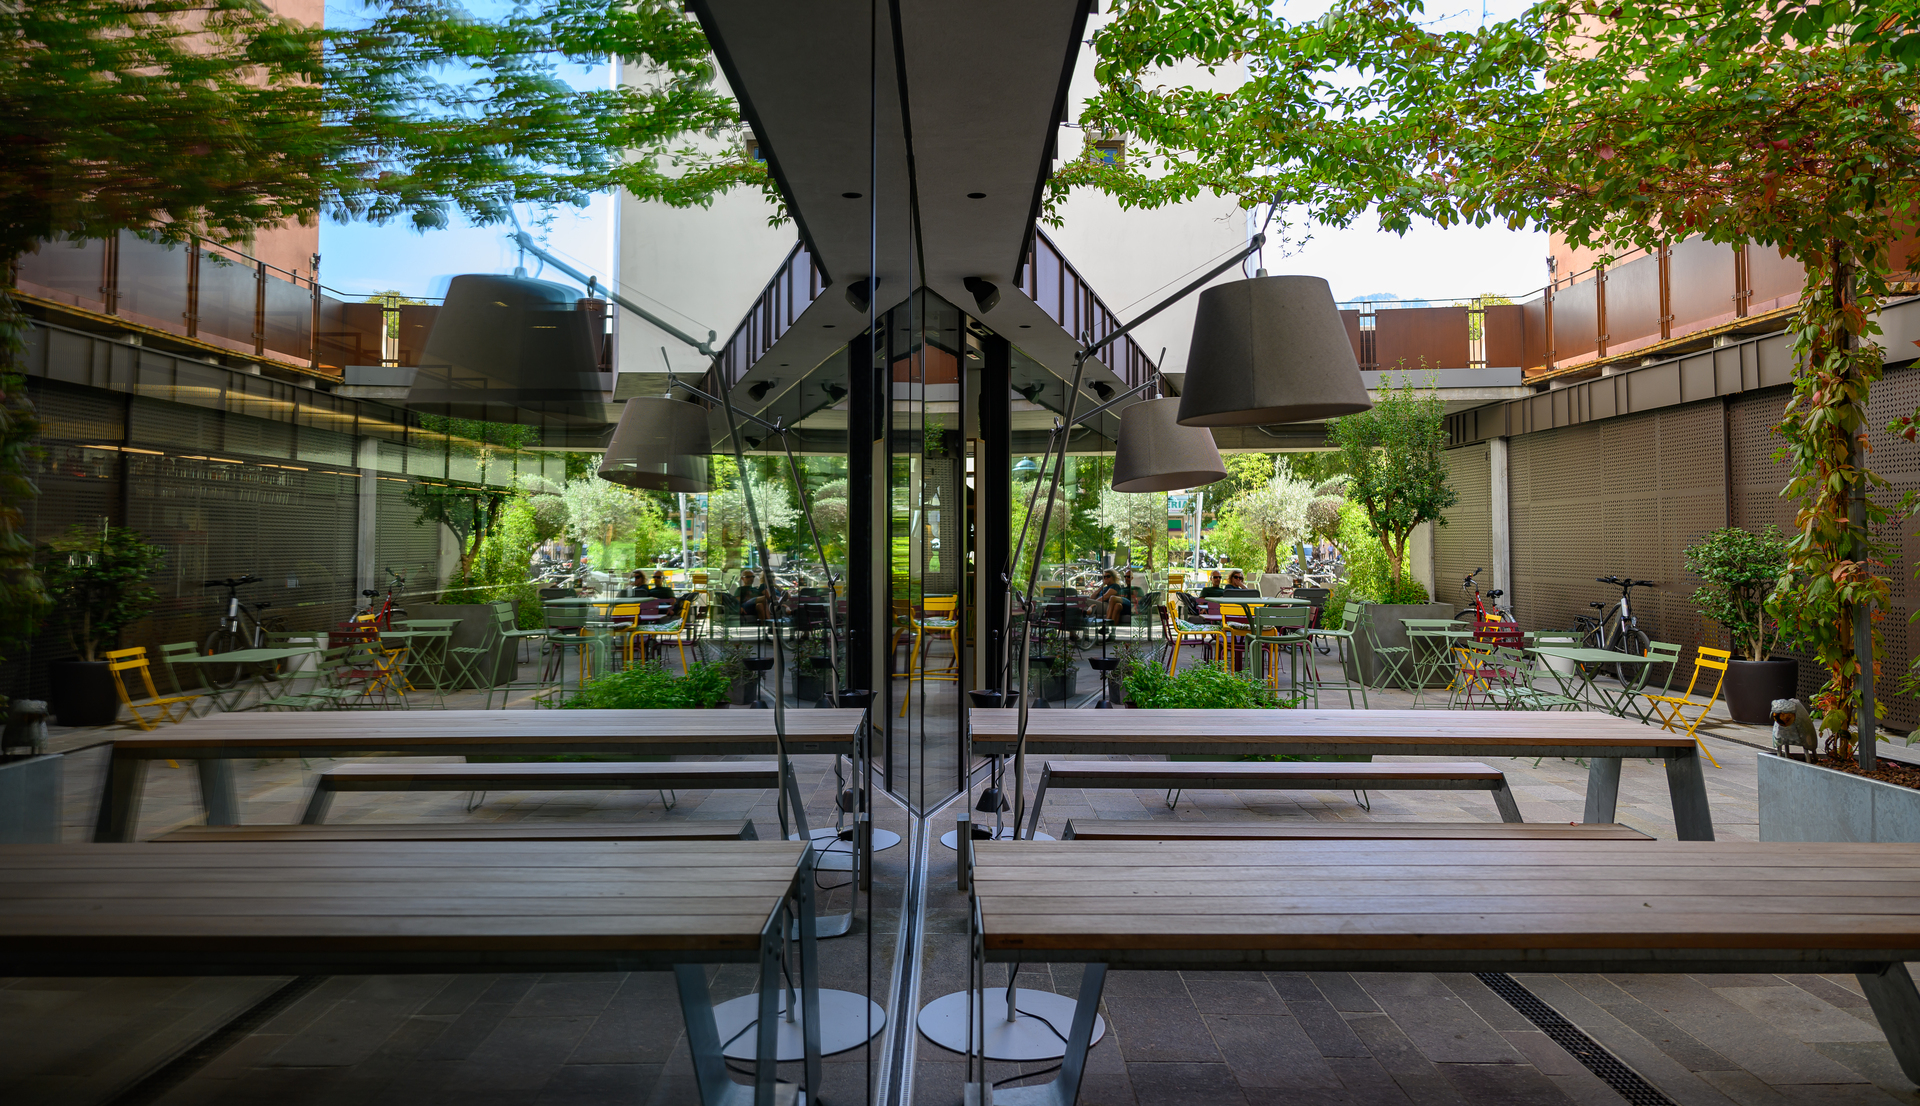 Image of the hotel exterior with benches and tables illuminated by Tolomeo Paralume Outdoor.